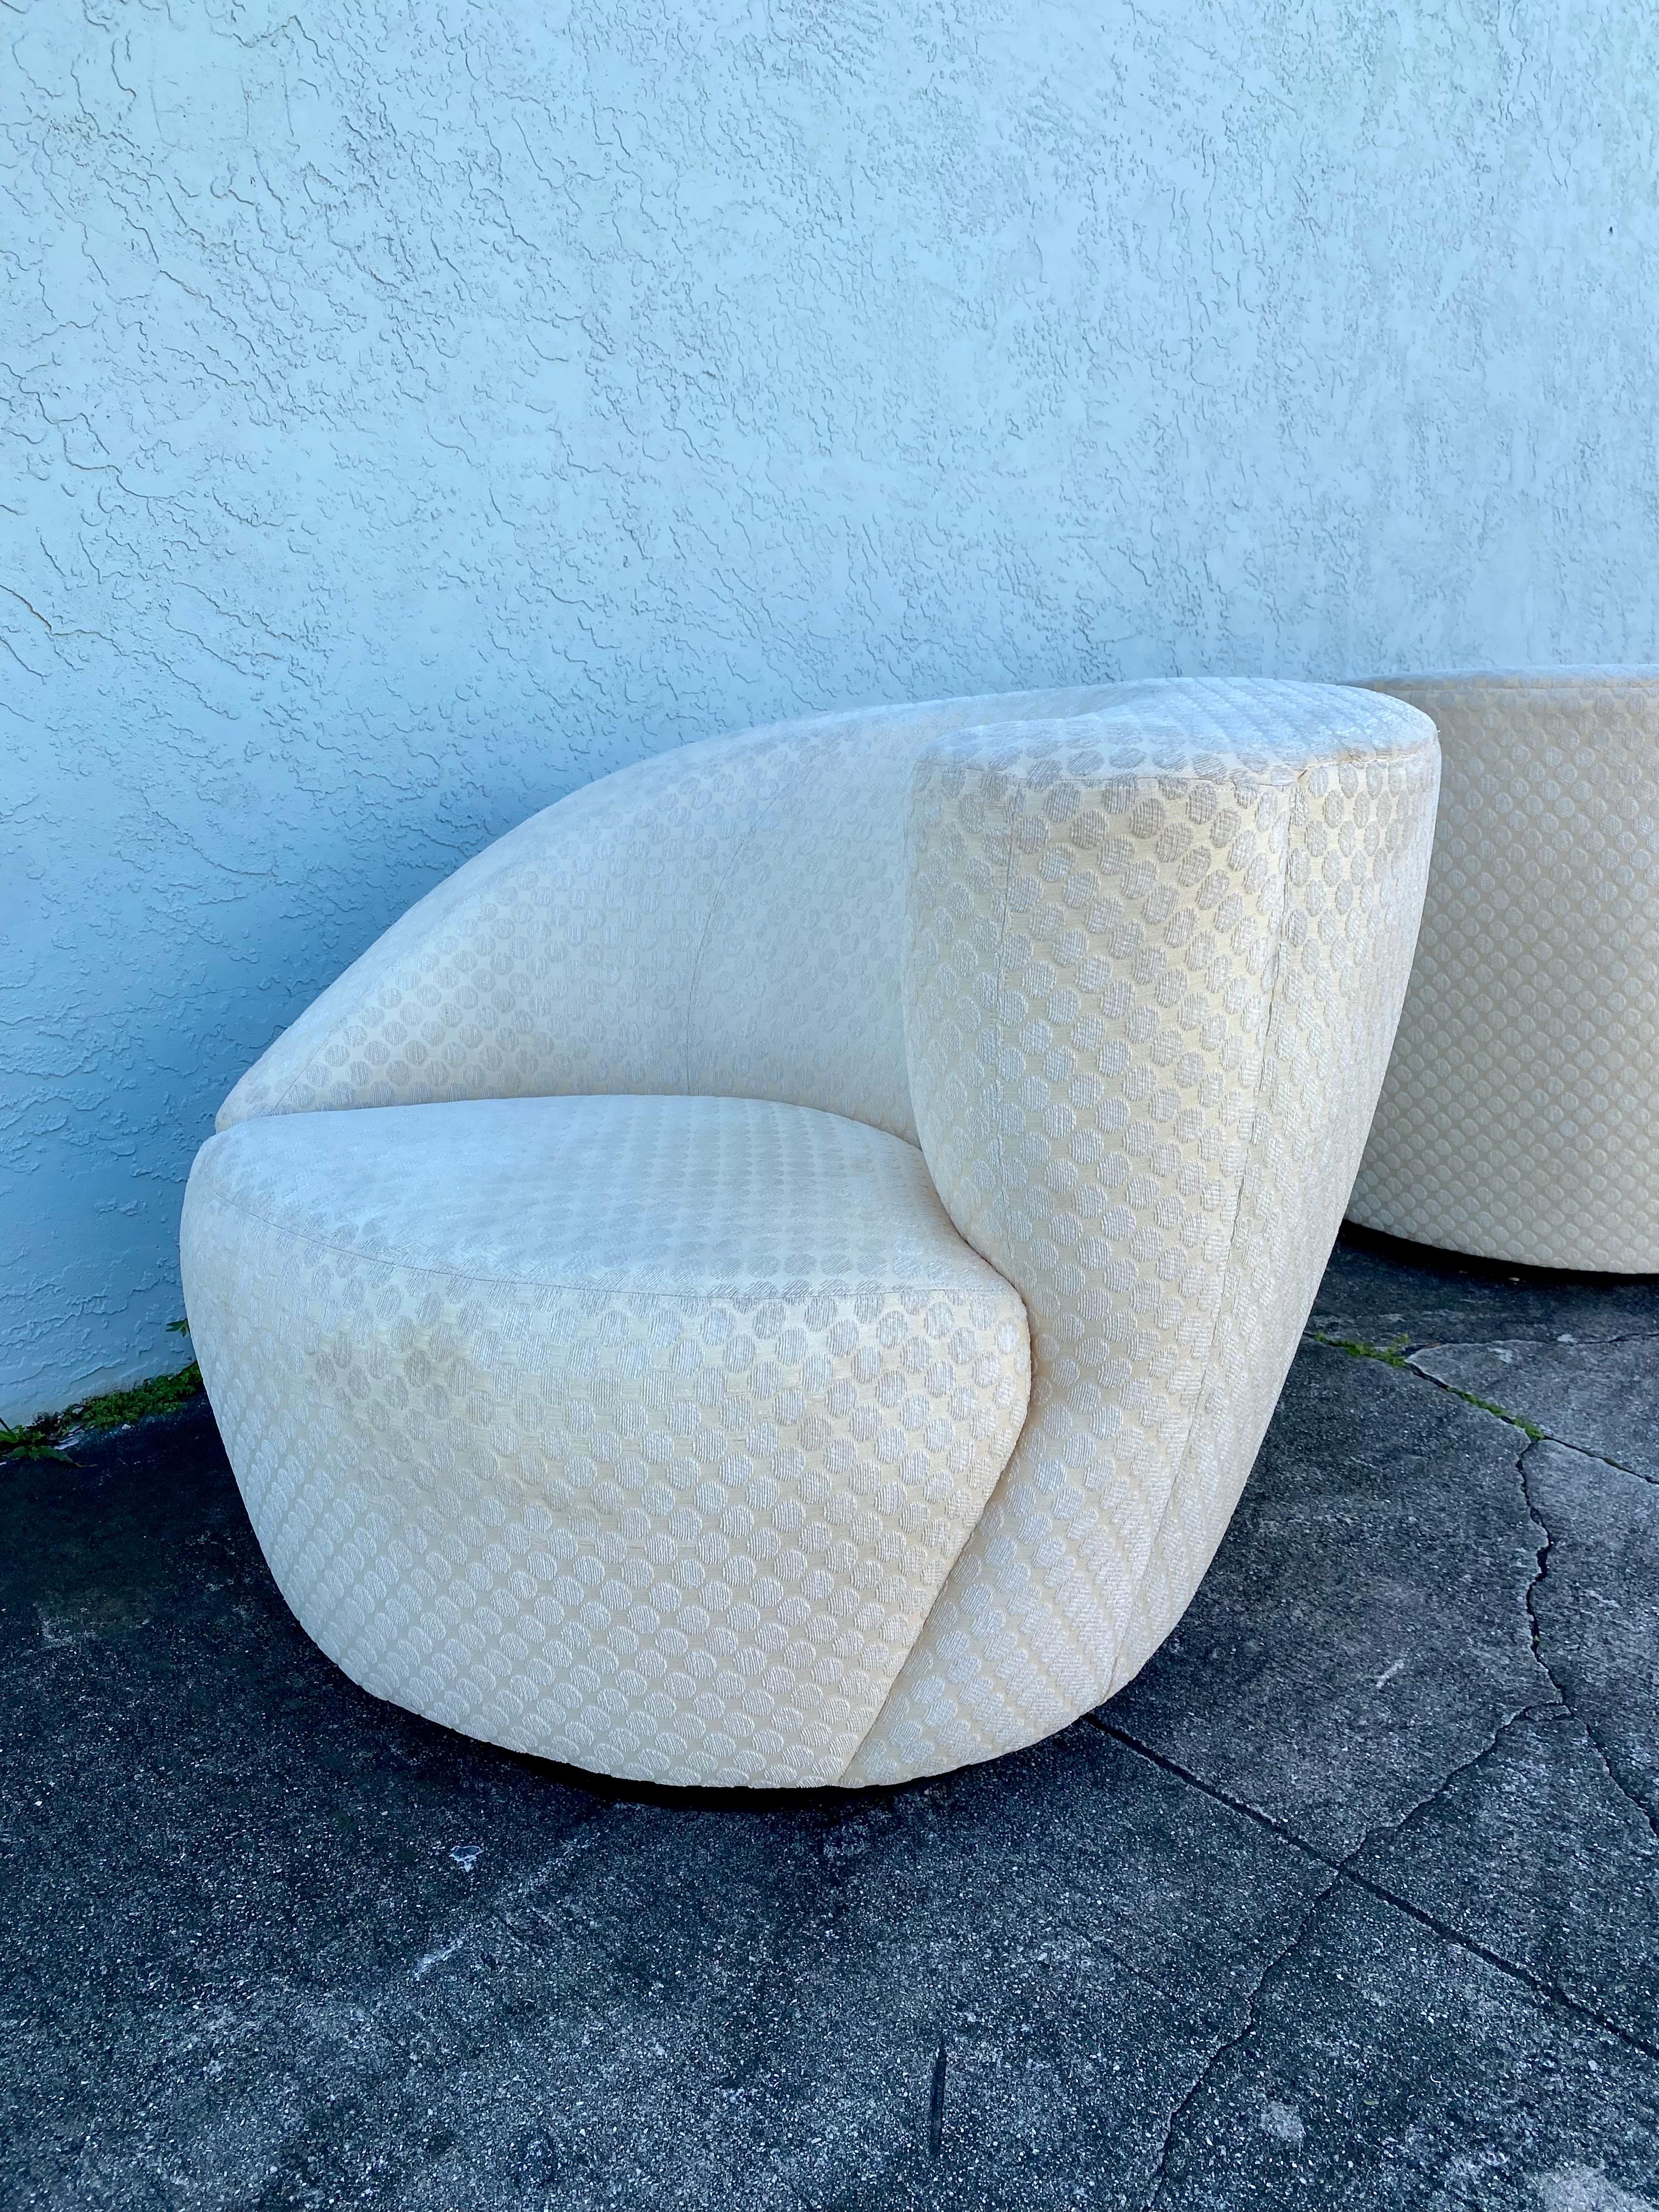 1980s Directional Cream Polka Dots Swivel Chairs, Set of 2 For Sale 2